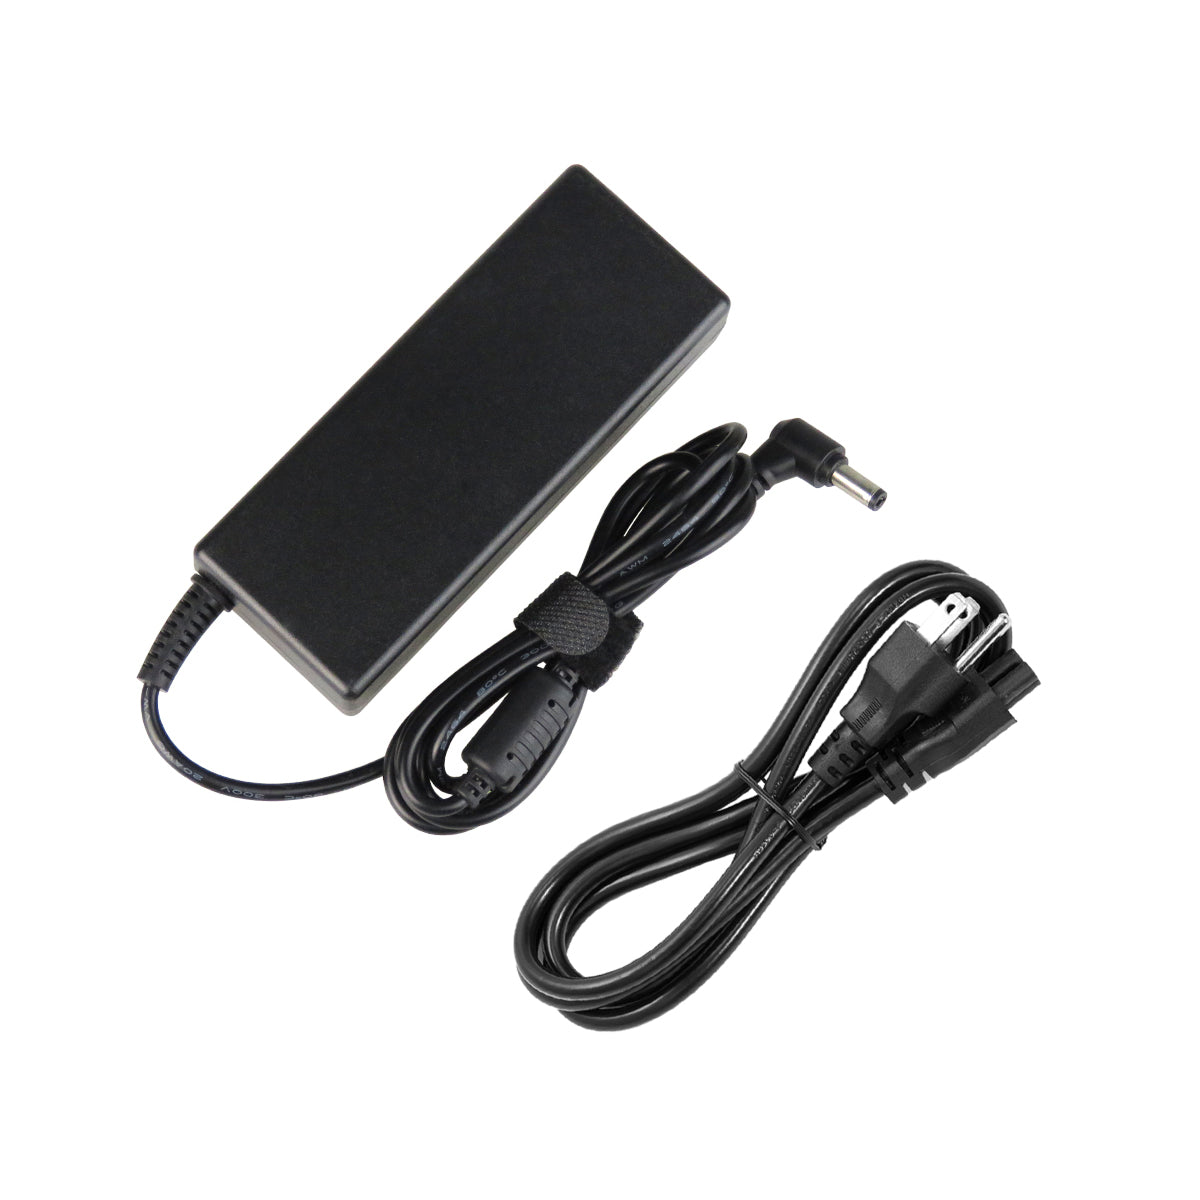 AC Adapter Charger for Lenovo 3000 G510 Notebook.